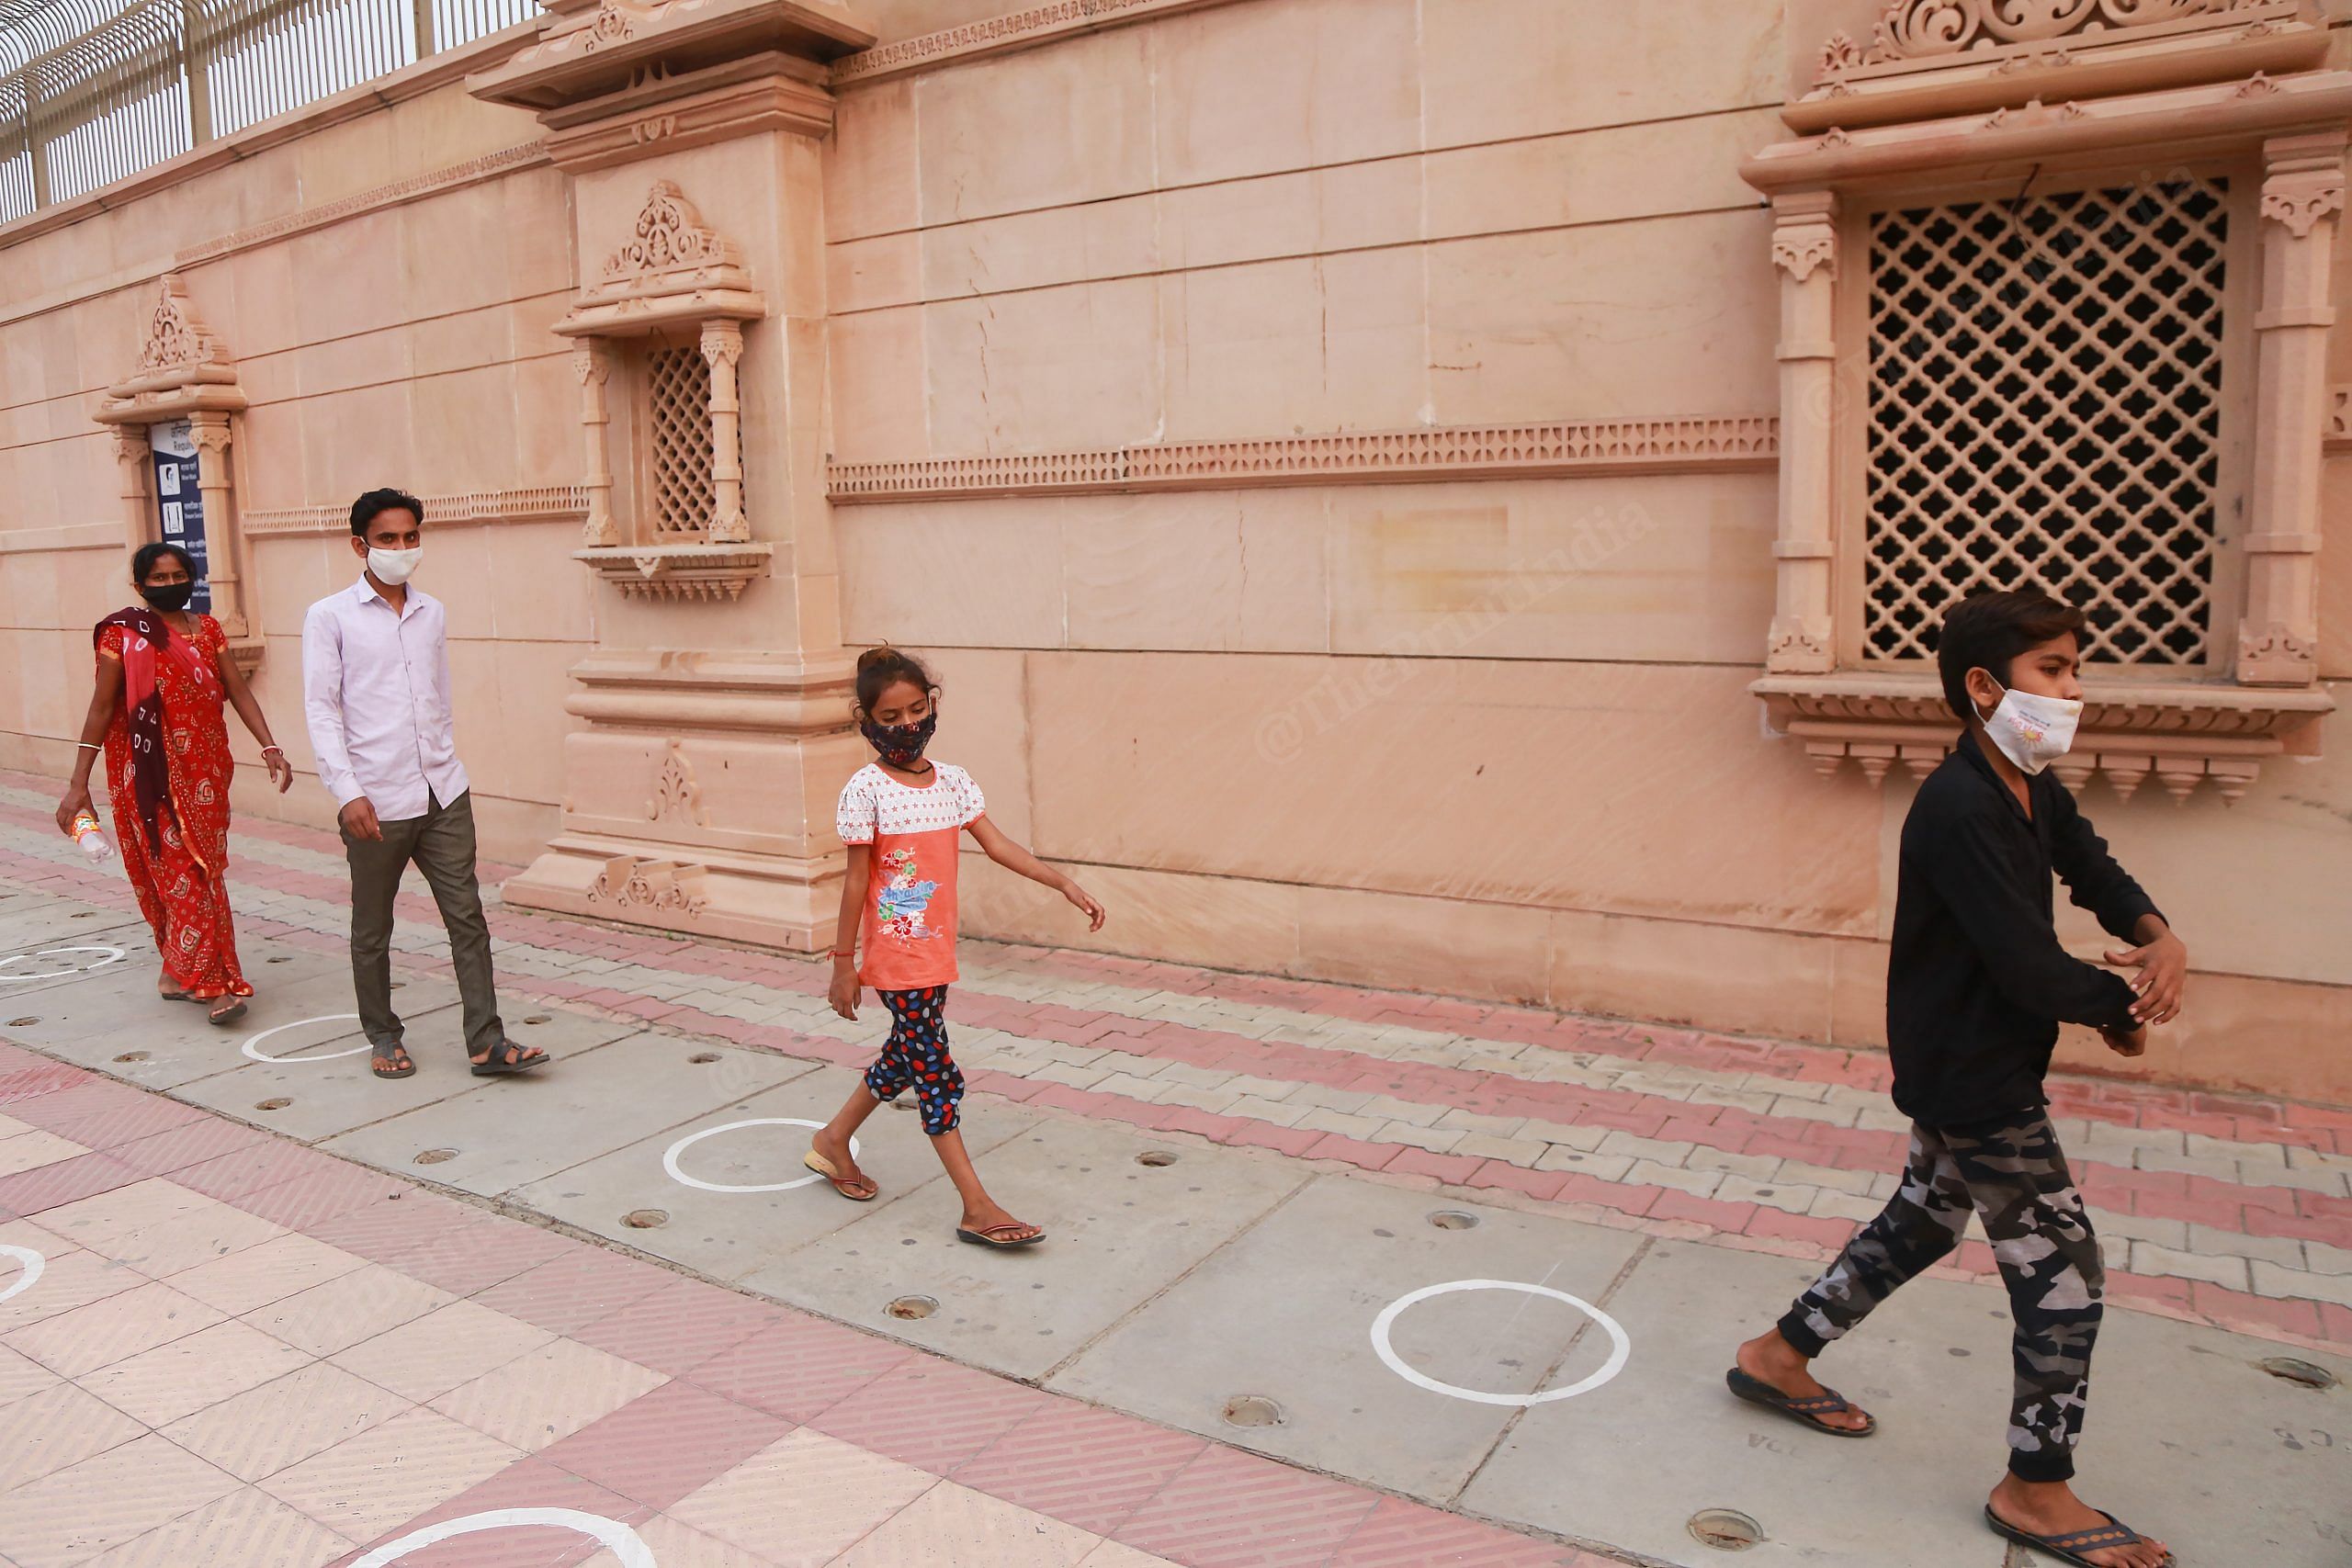 Circles are drawn on the footpath to maintain social distancing | Photo: Praveen Jain | ThePrint